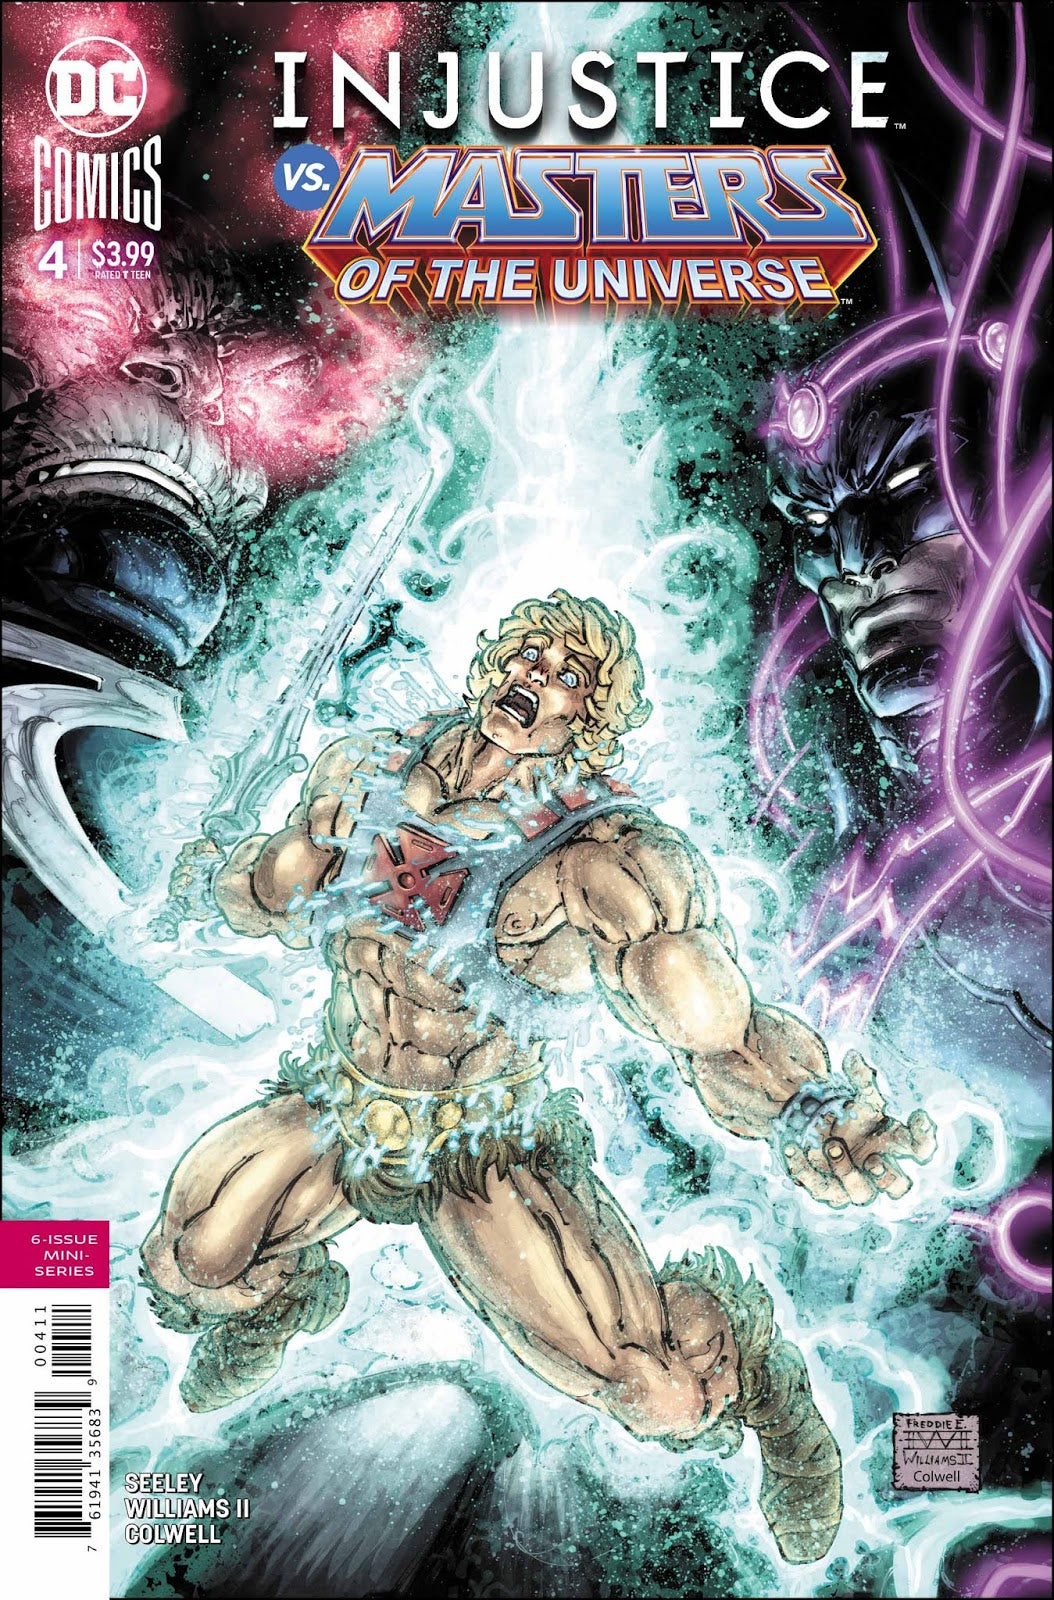 Injustice Vs Masters of the Universe #4 (of 6)